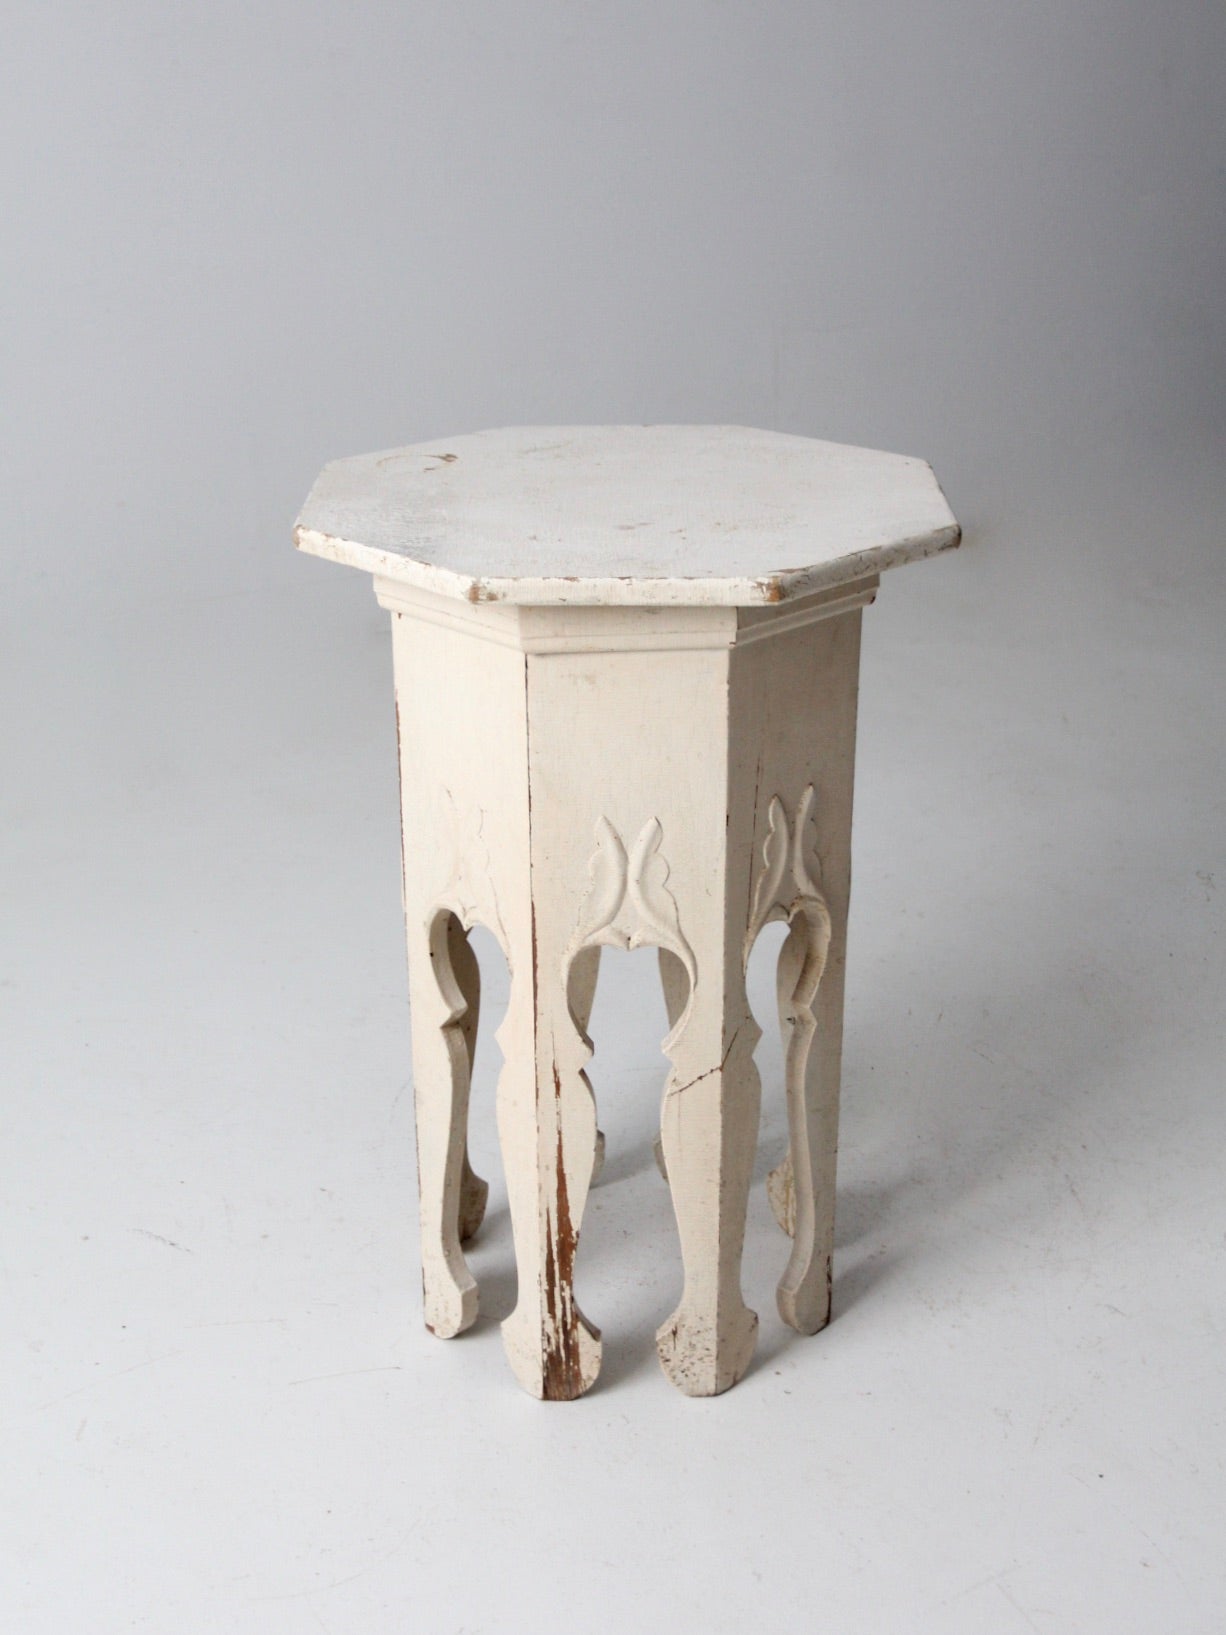 antique octogonal side table